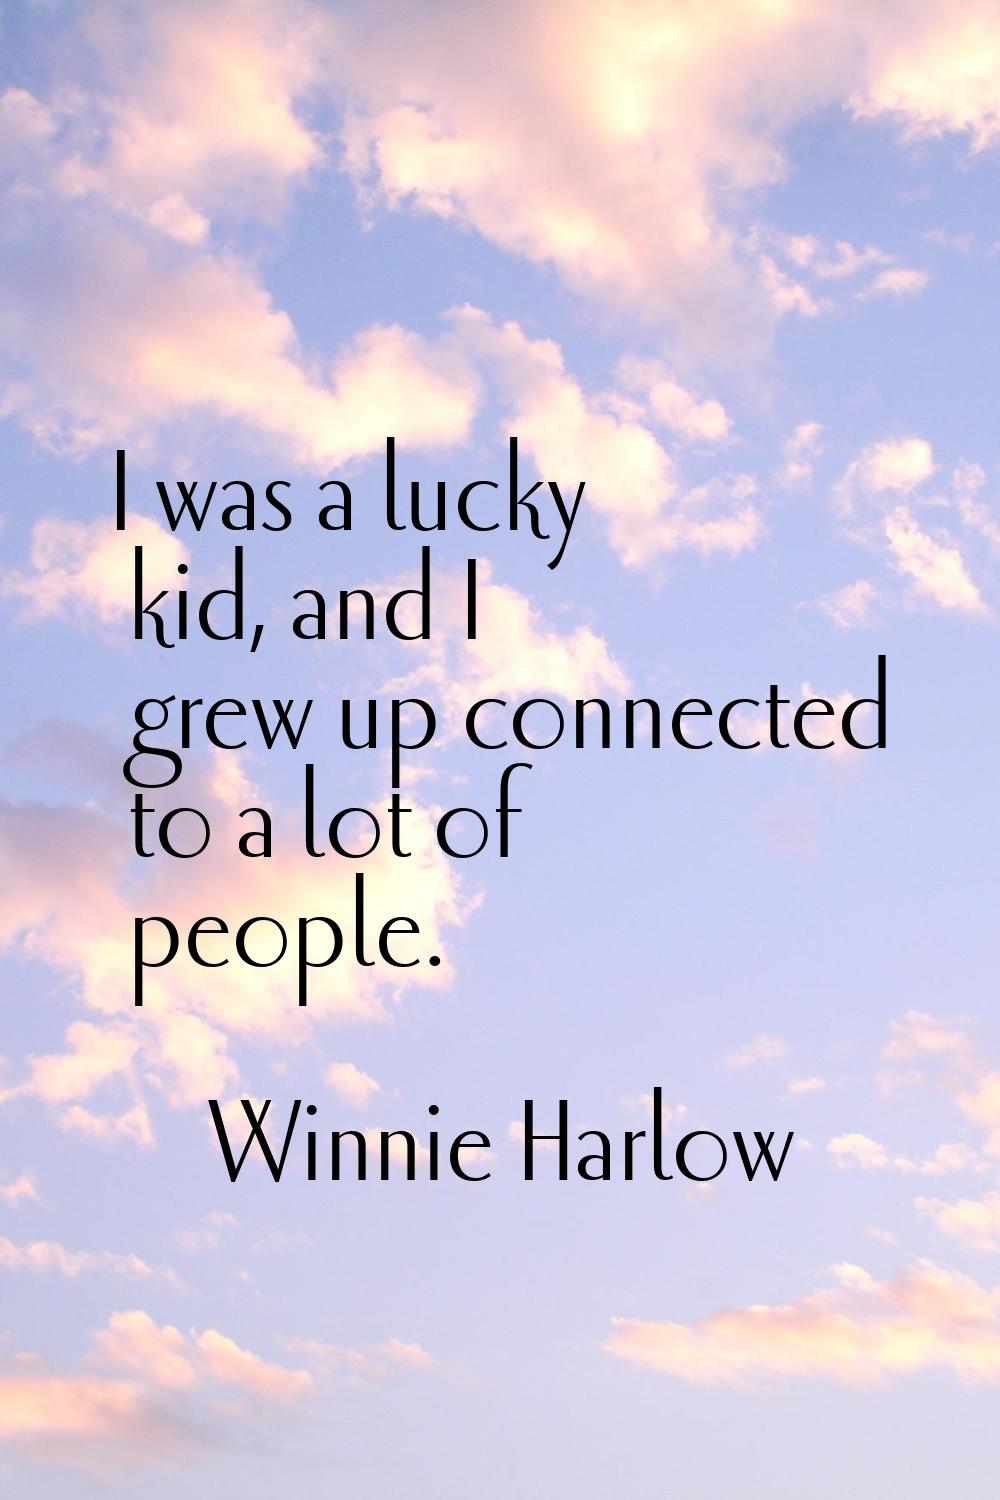 I was a lucky kid, and I grew up connected to a lot of people.